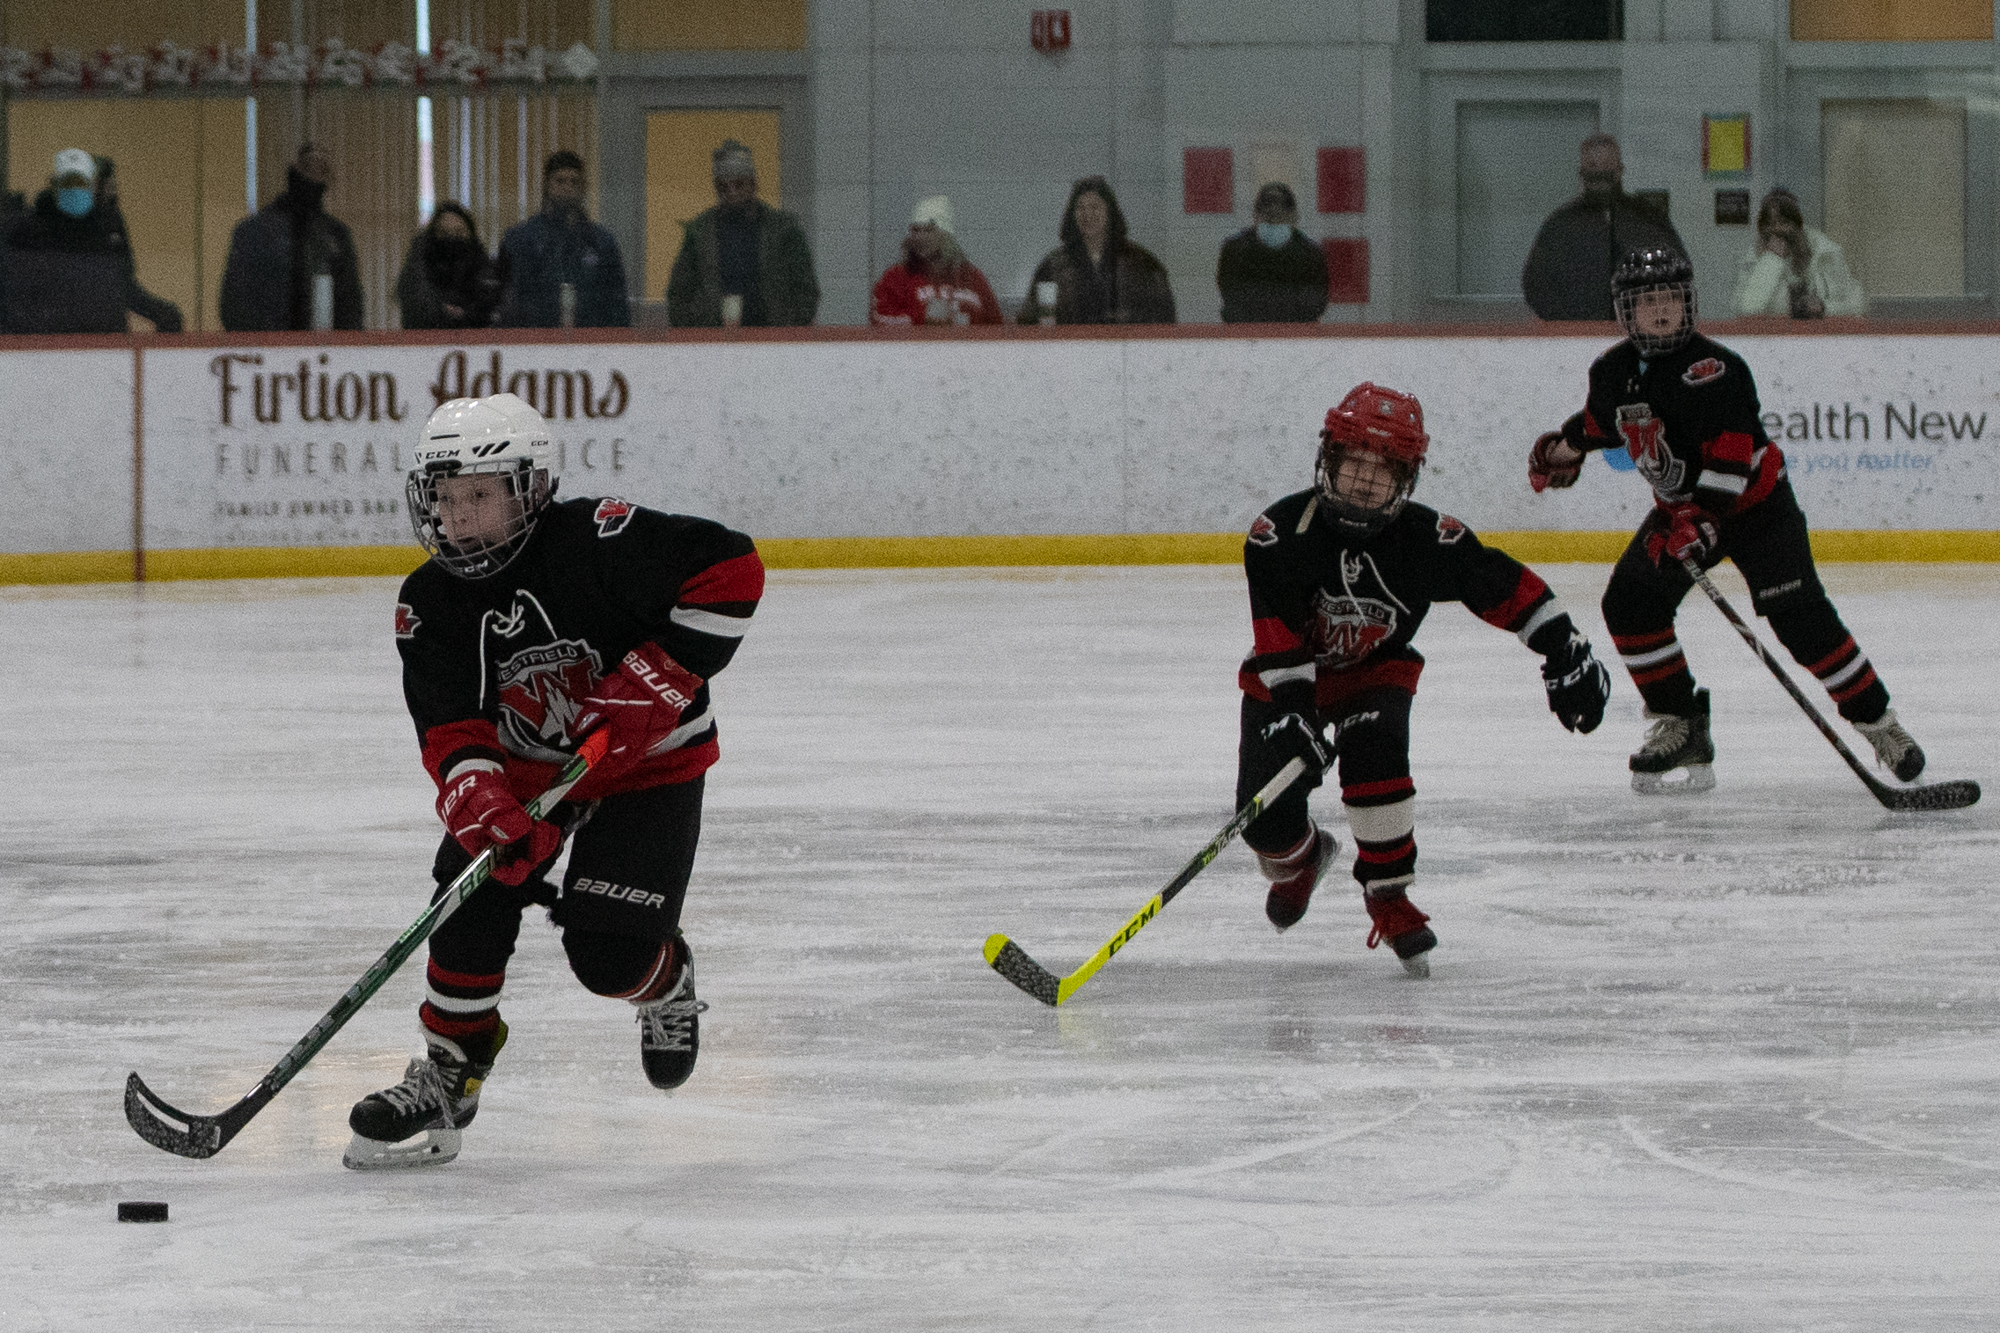 The Westfield Junior Bombers Red take battle the Northern Rhode Island Vikings in a Westfield Youth Hockey Fire & Ice Tournament game Sunday at Amelia Park Arena. The game ended in a 2-2 tie. (Bill Deren / The Westfield News)